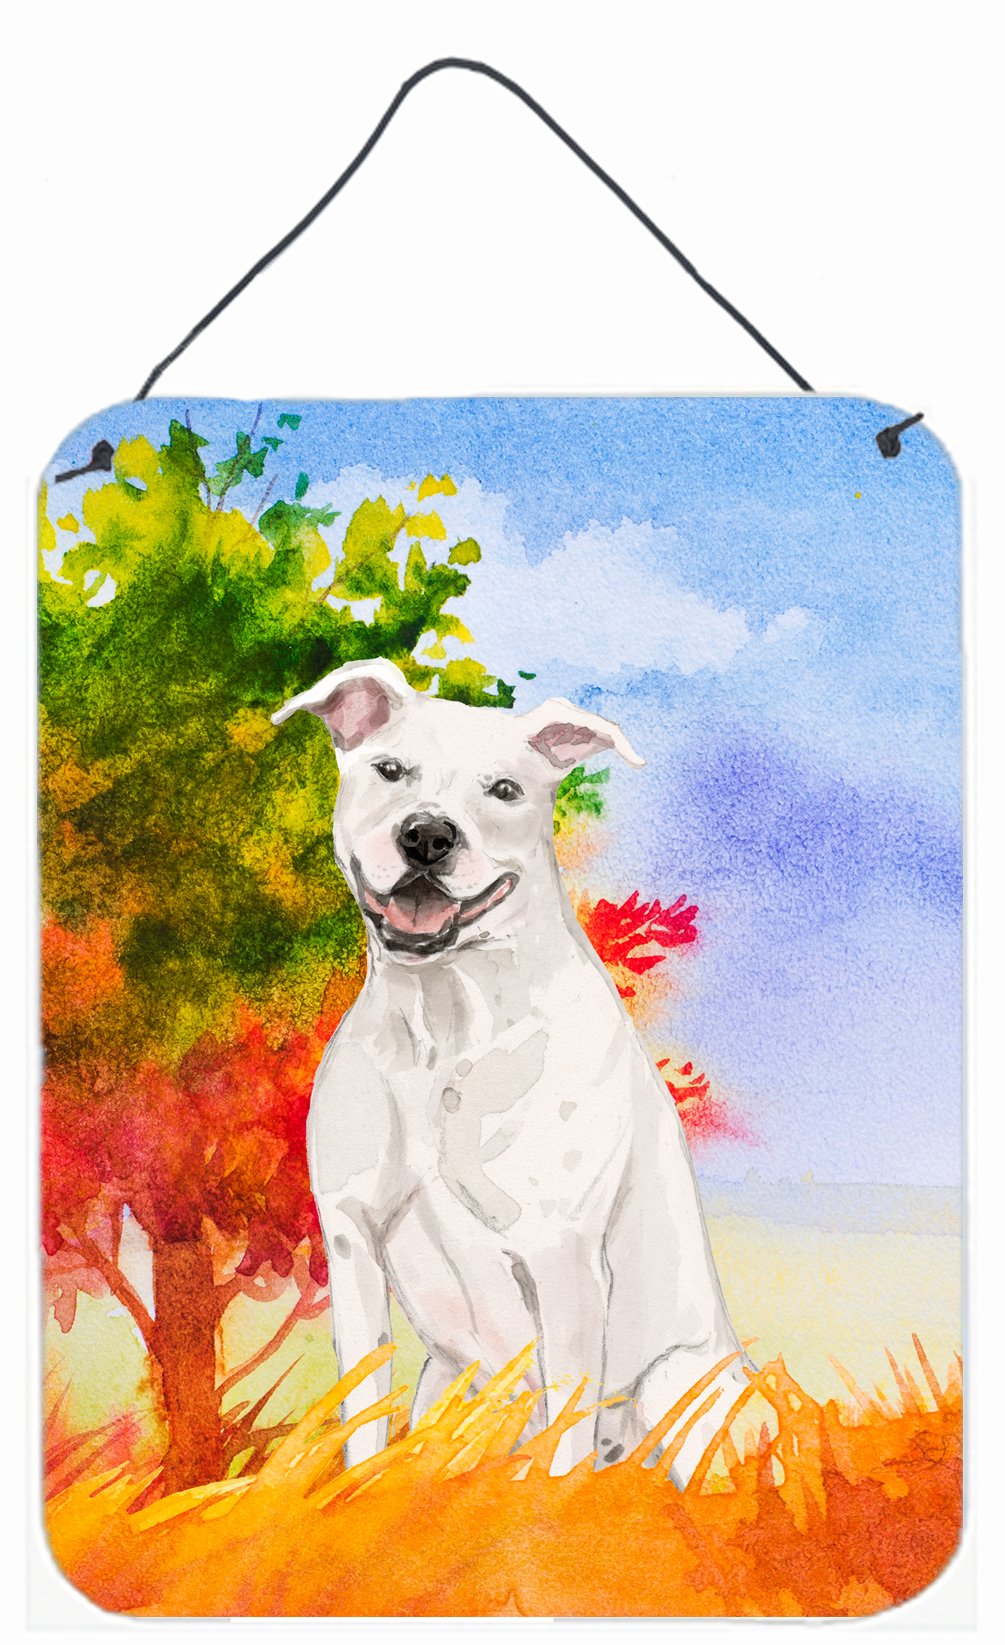 Fall White Staffie Bull Terrier Wall or Door Hanging Prints CK1961DS1216 by Caroline's Treasures